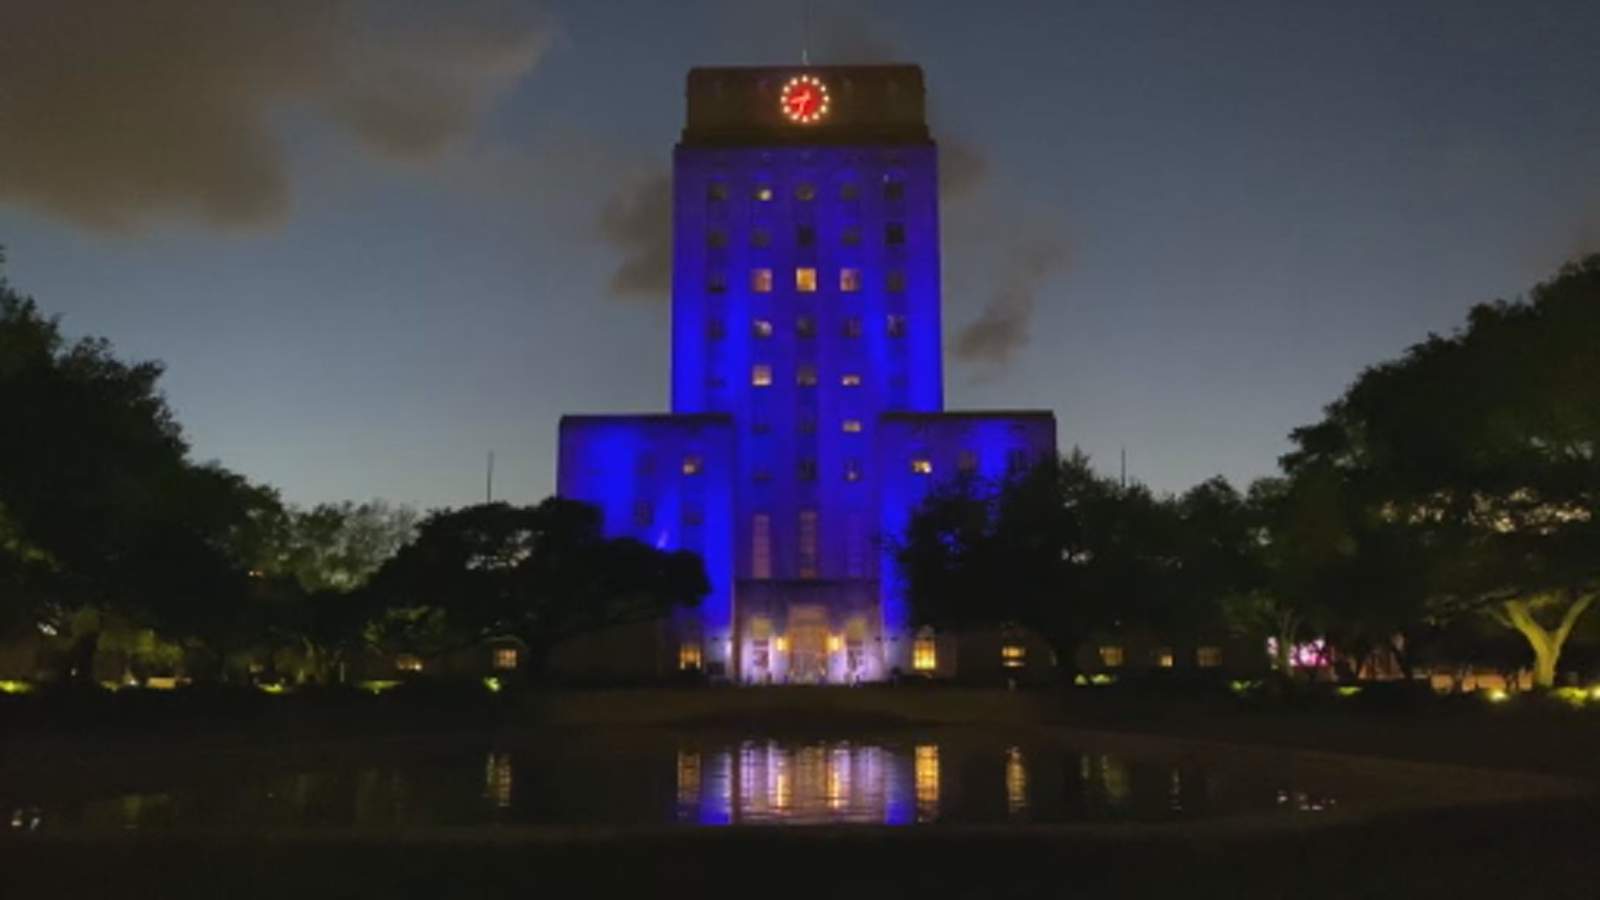 Turner offers condolences to Houston police officer Jason Knox’s family, says City Hall lit up blue tonight to honor fallen officer